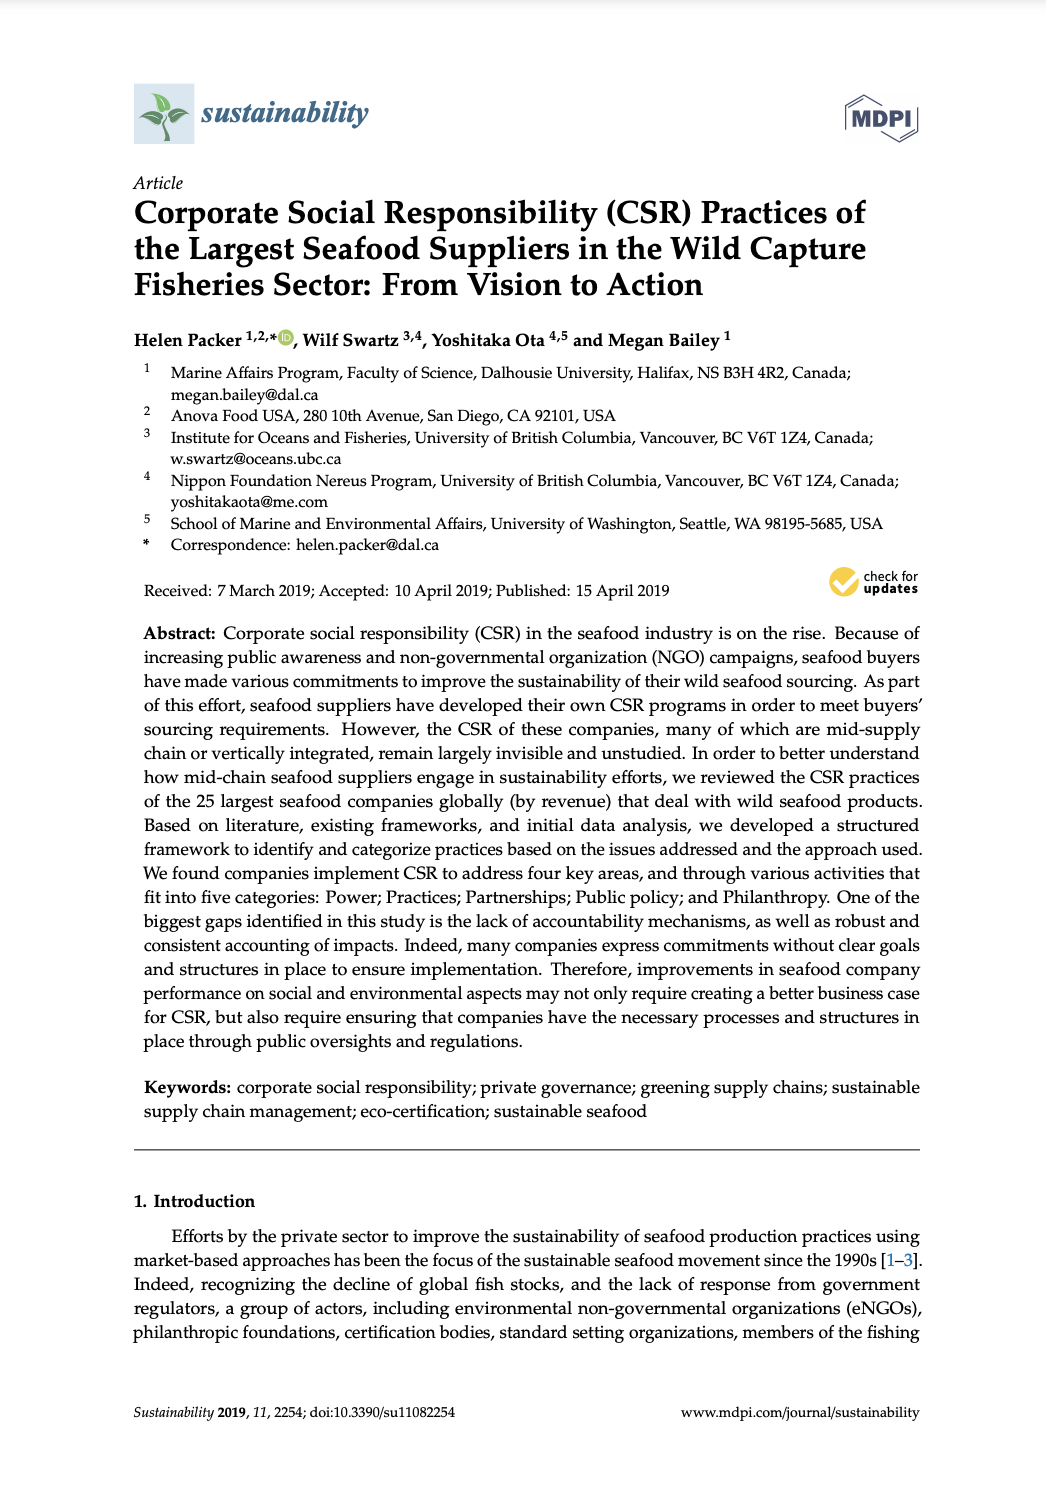 Corporate Social Responsibility Practices of the Largest Seafood Suppliers in the Wild Capture Fisheries Sector